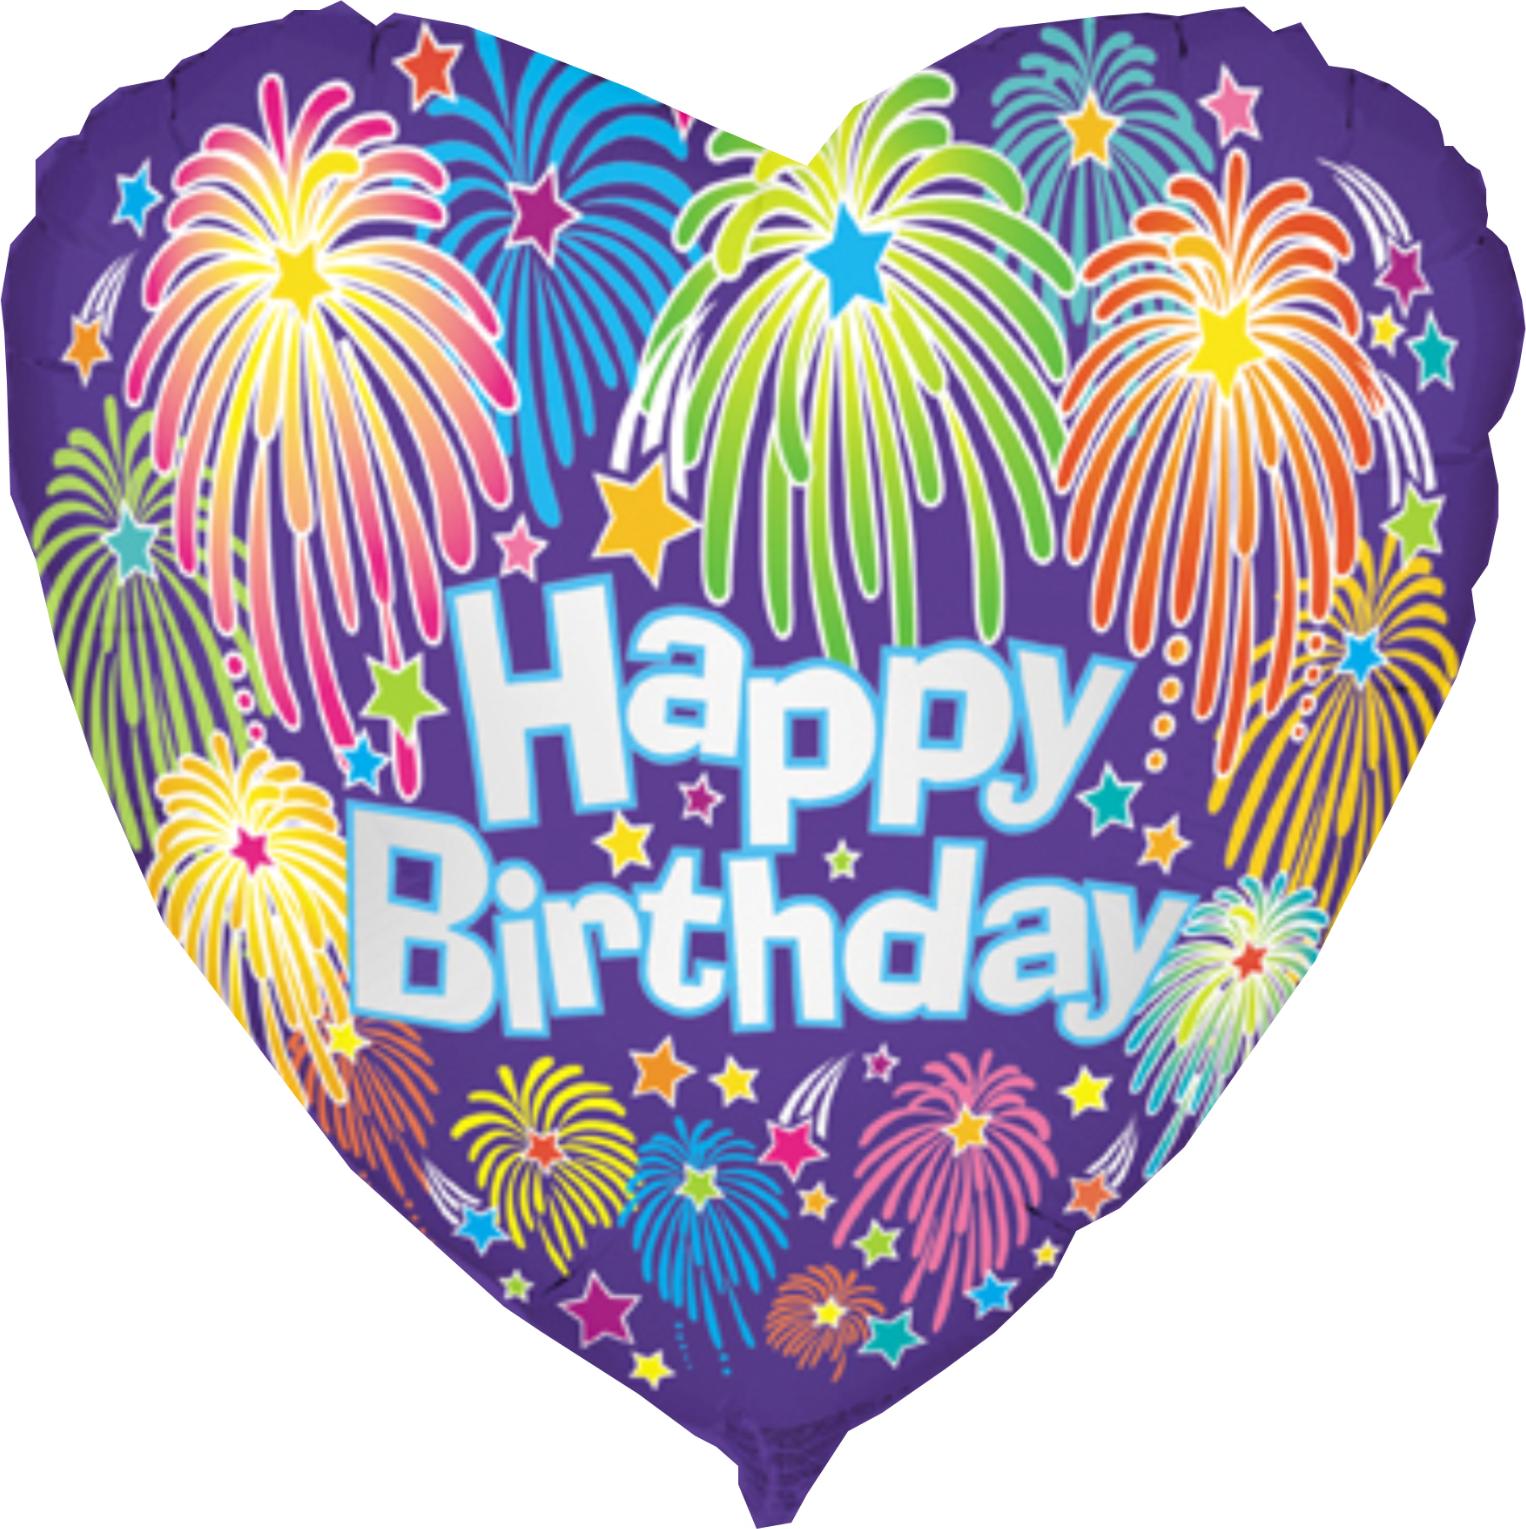 Image Of A Happy Birthday Balloons - ClipArt Best